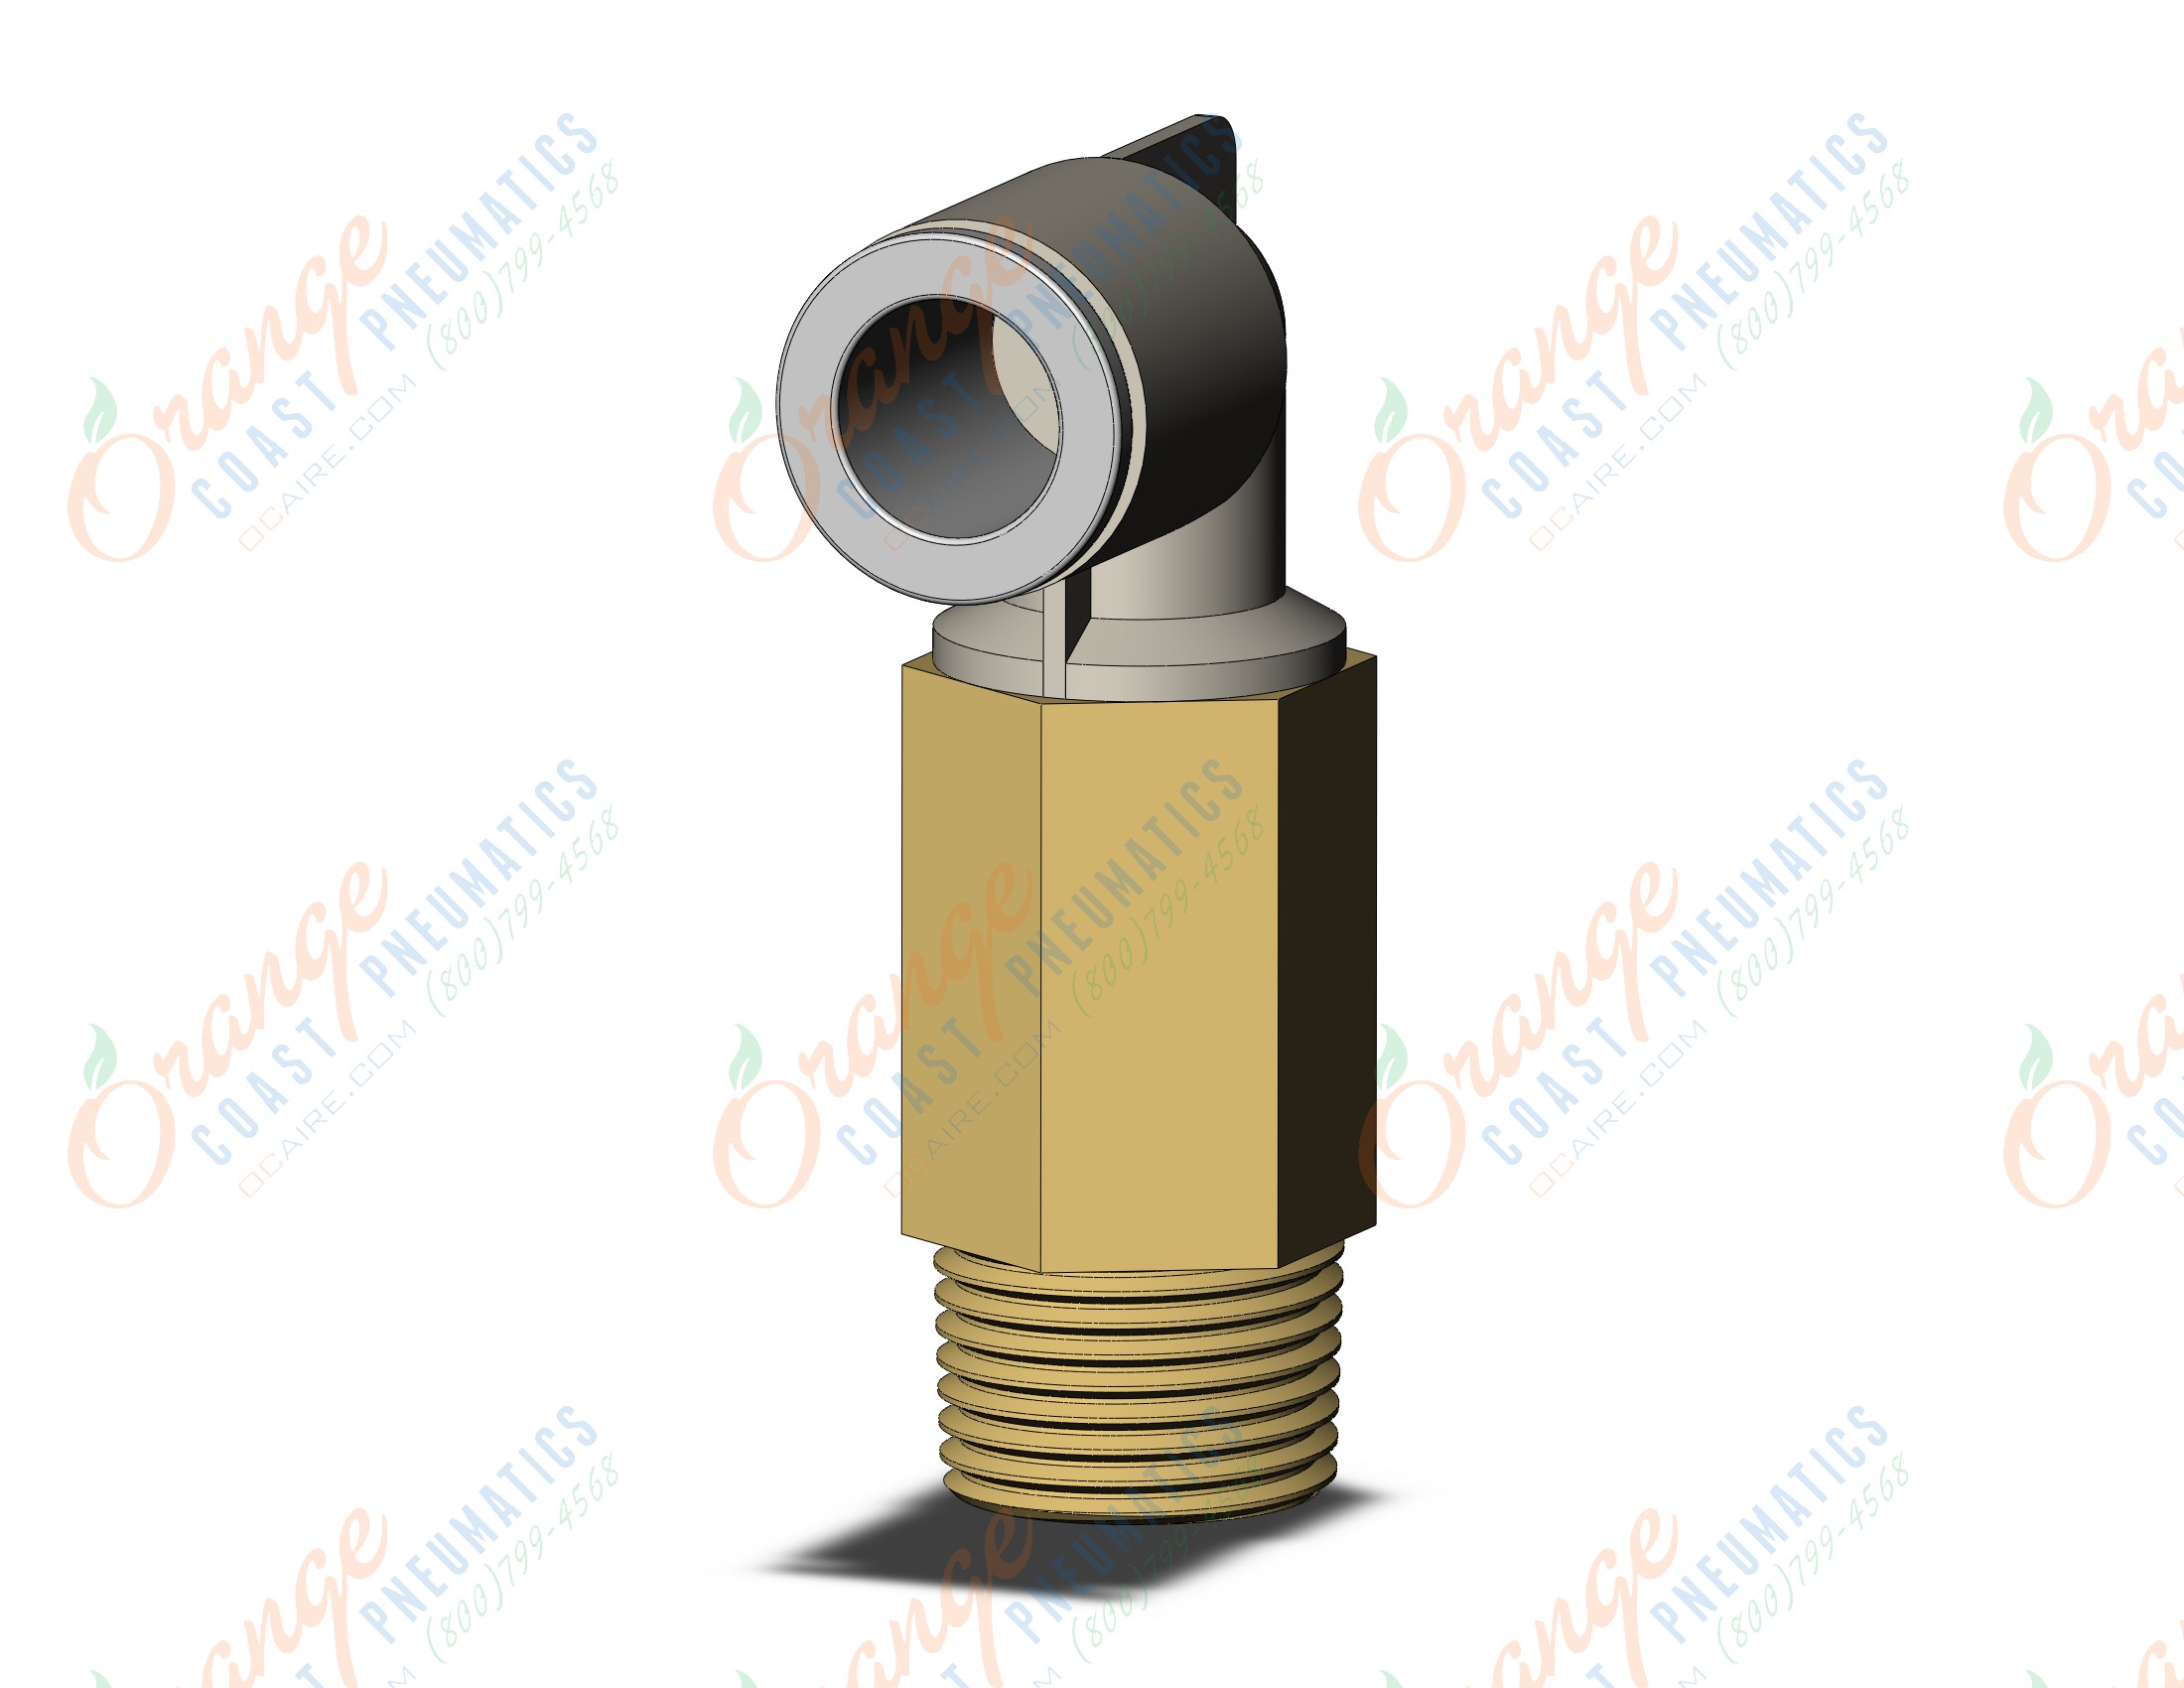 SMC KQ2W10-03A fitting, ext male elbow, KQ2 FITTING (sold in packages of 10; price is per piece)